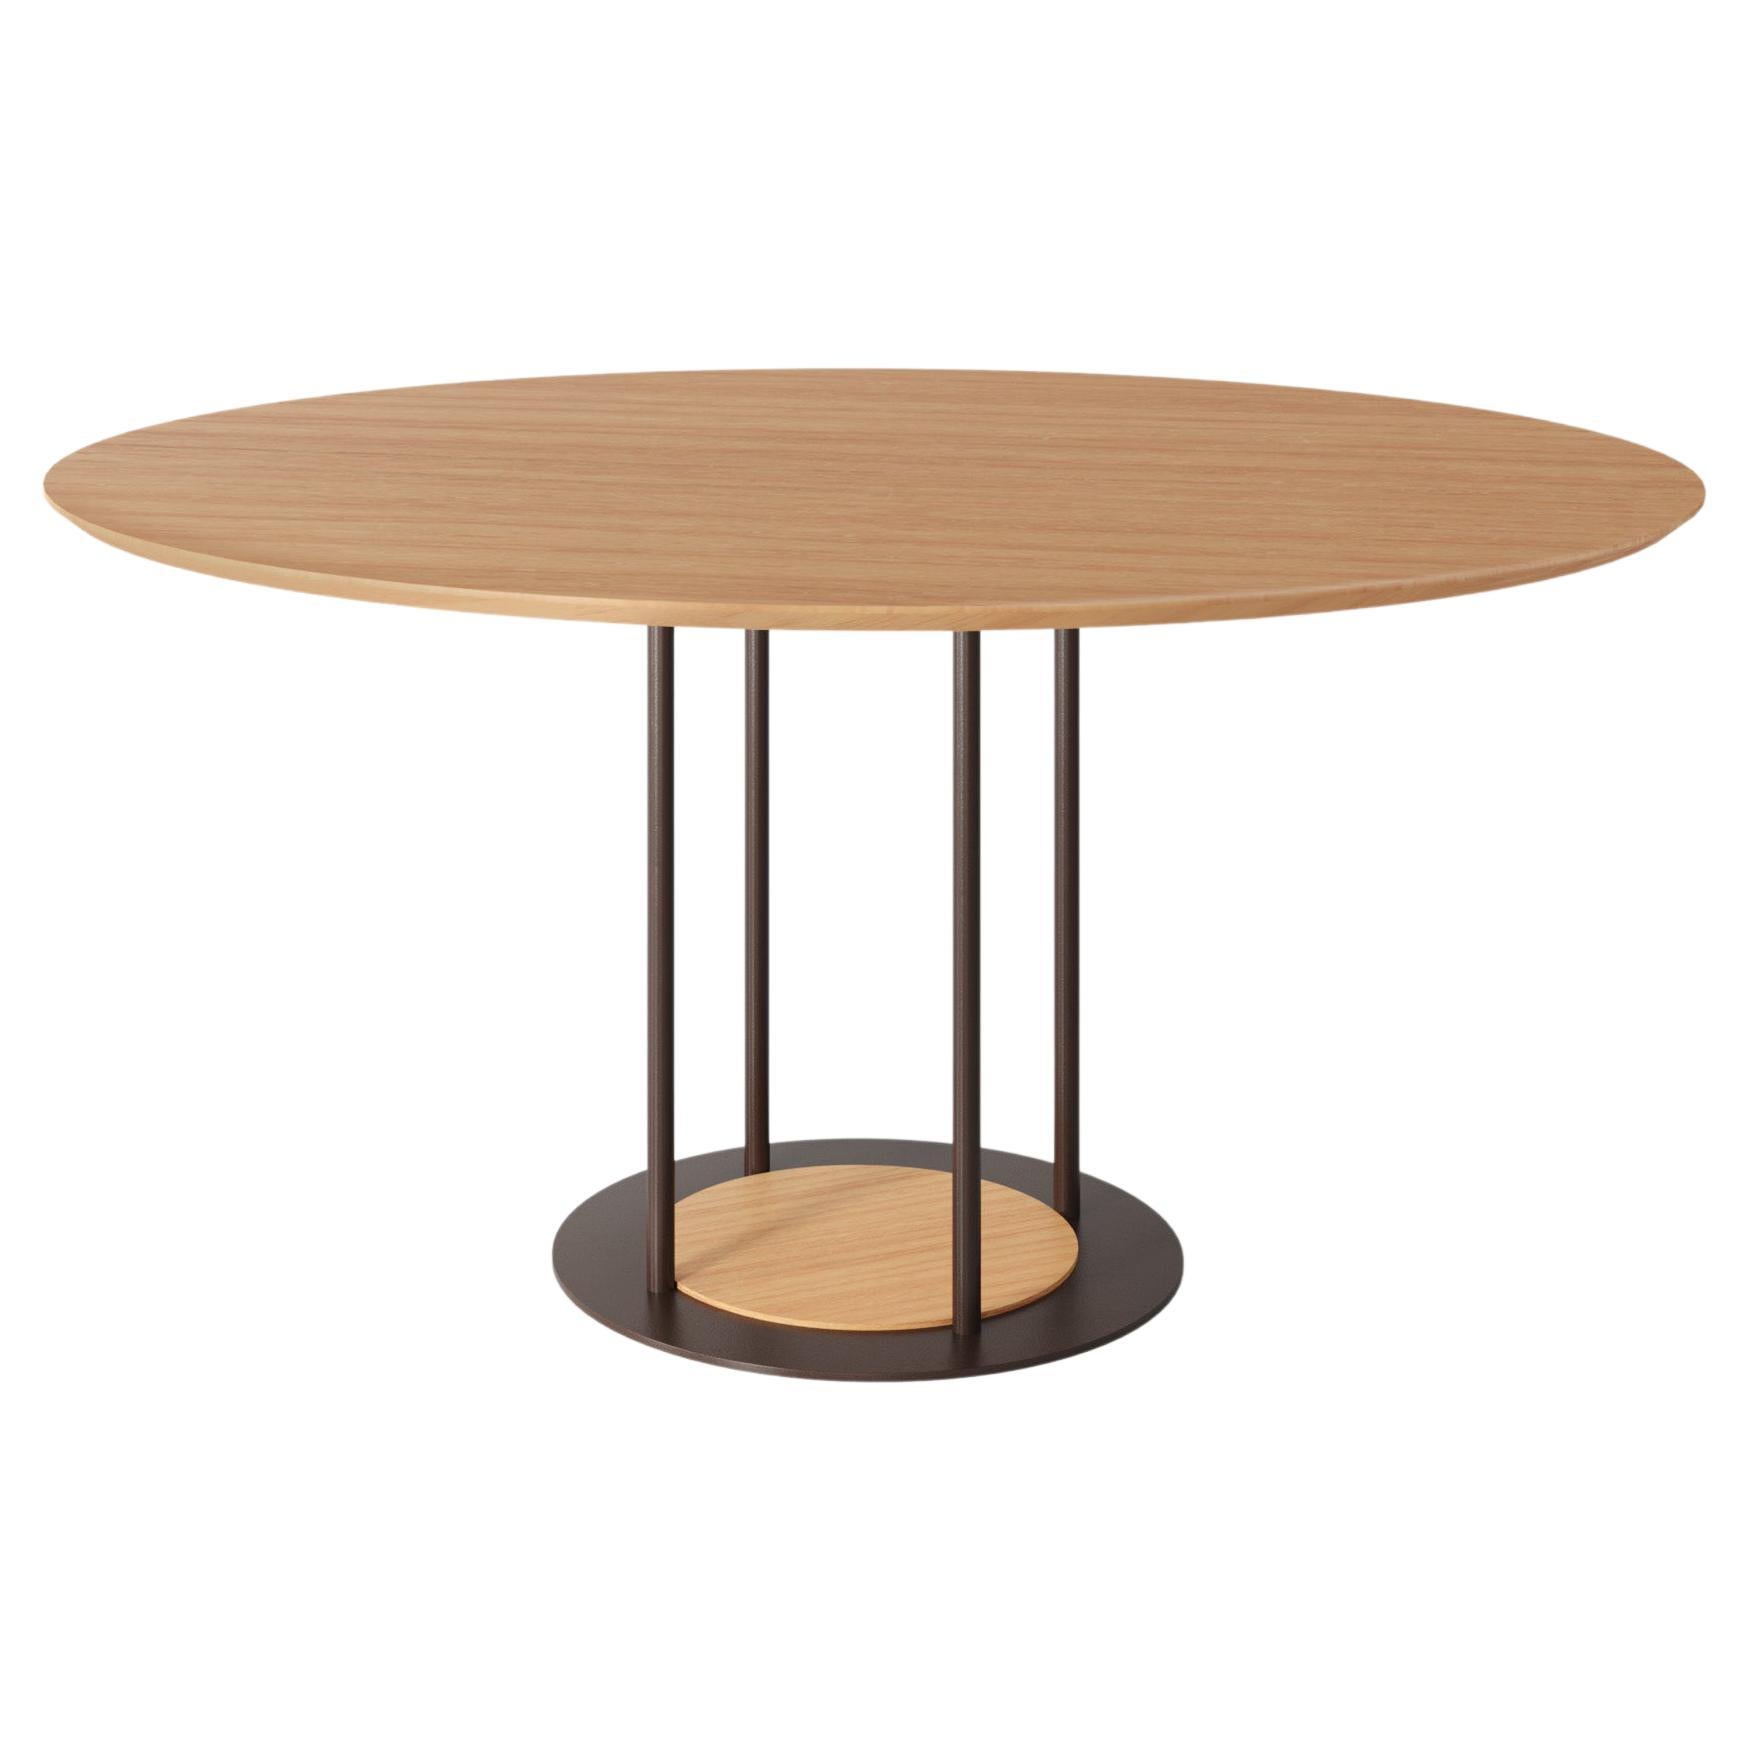 "Pilar" Modernist Round Dining Table painted Steel and Natural Wood